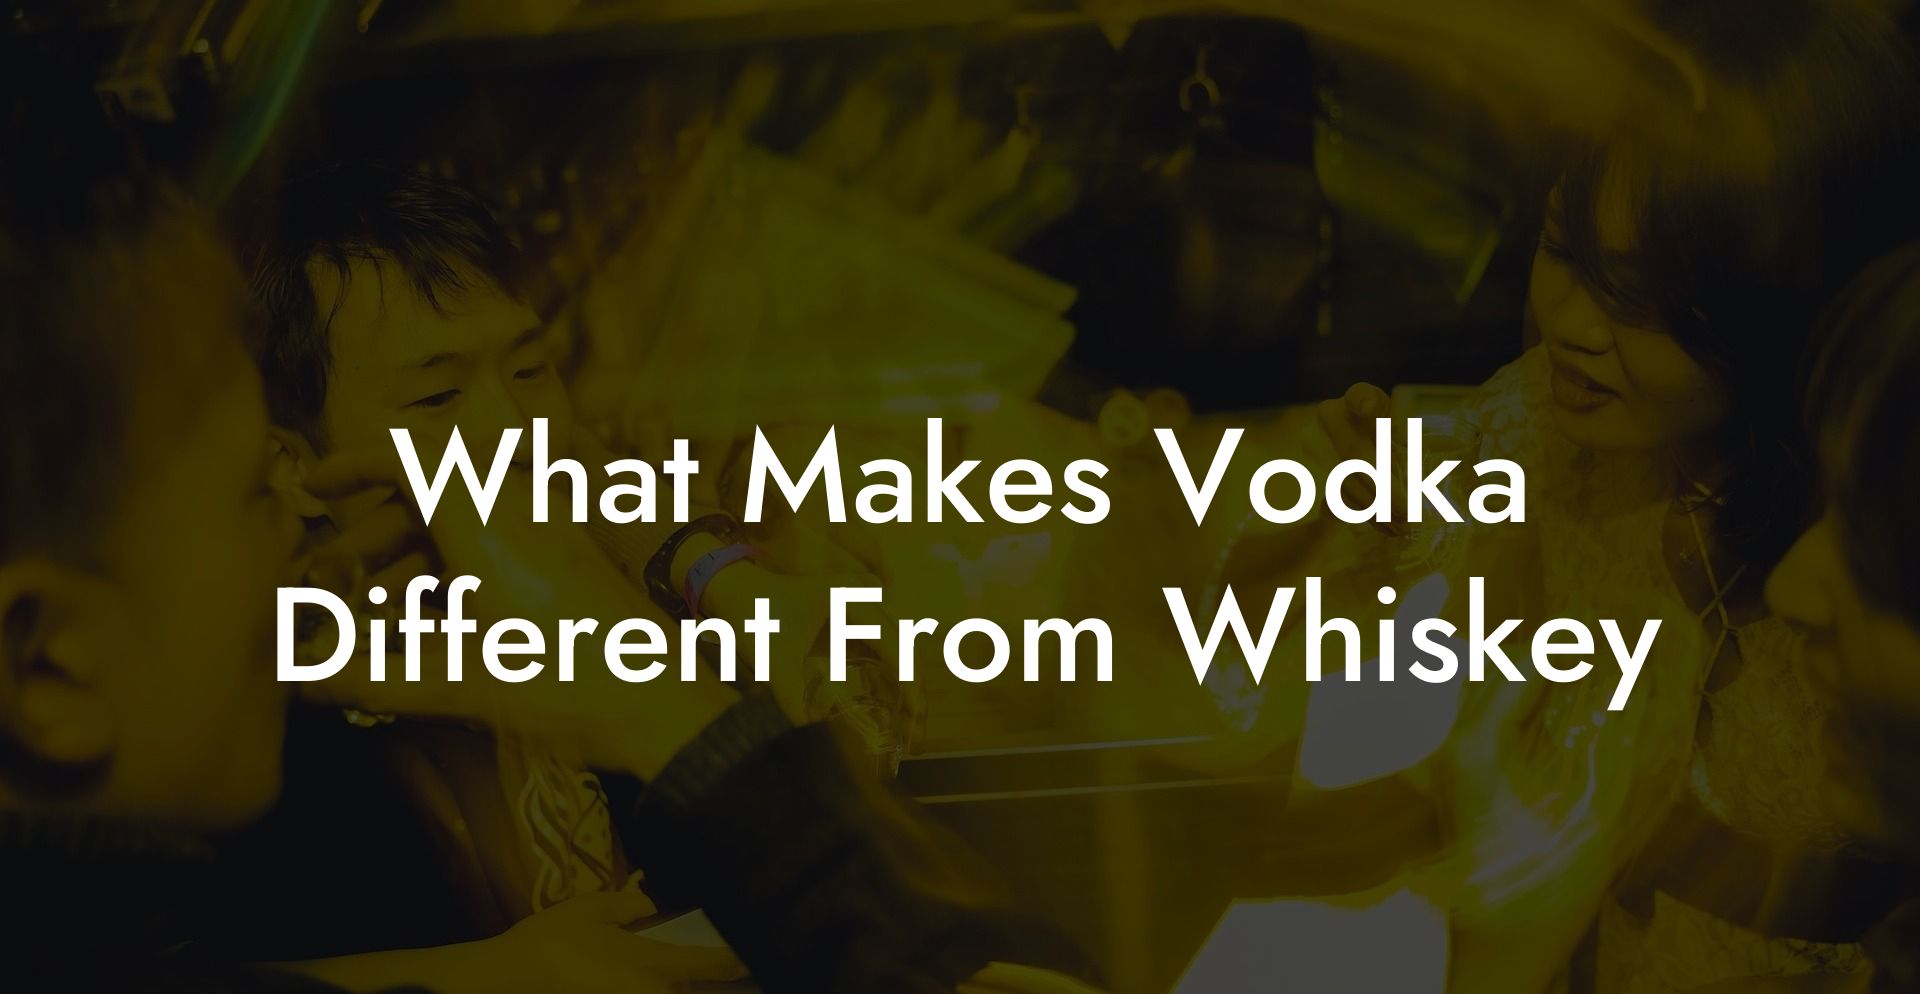 What Makes Vodka Different From Whiskey